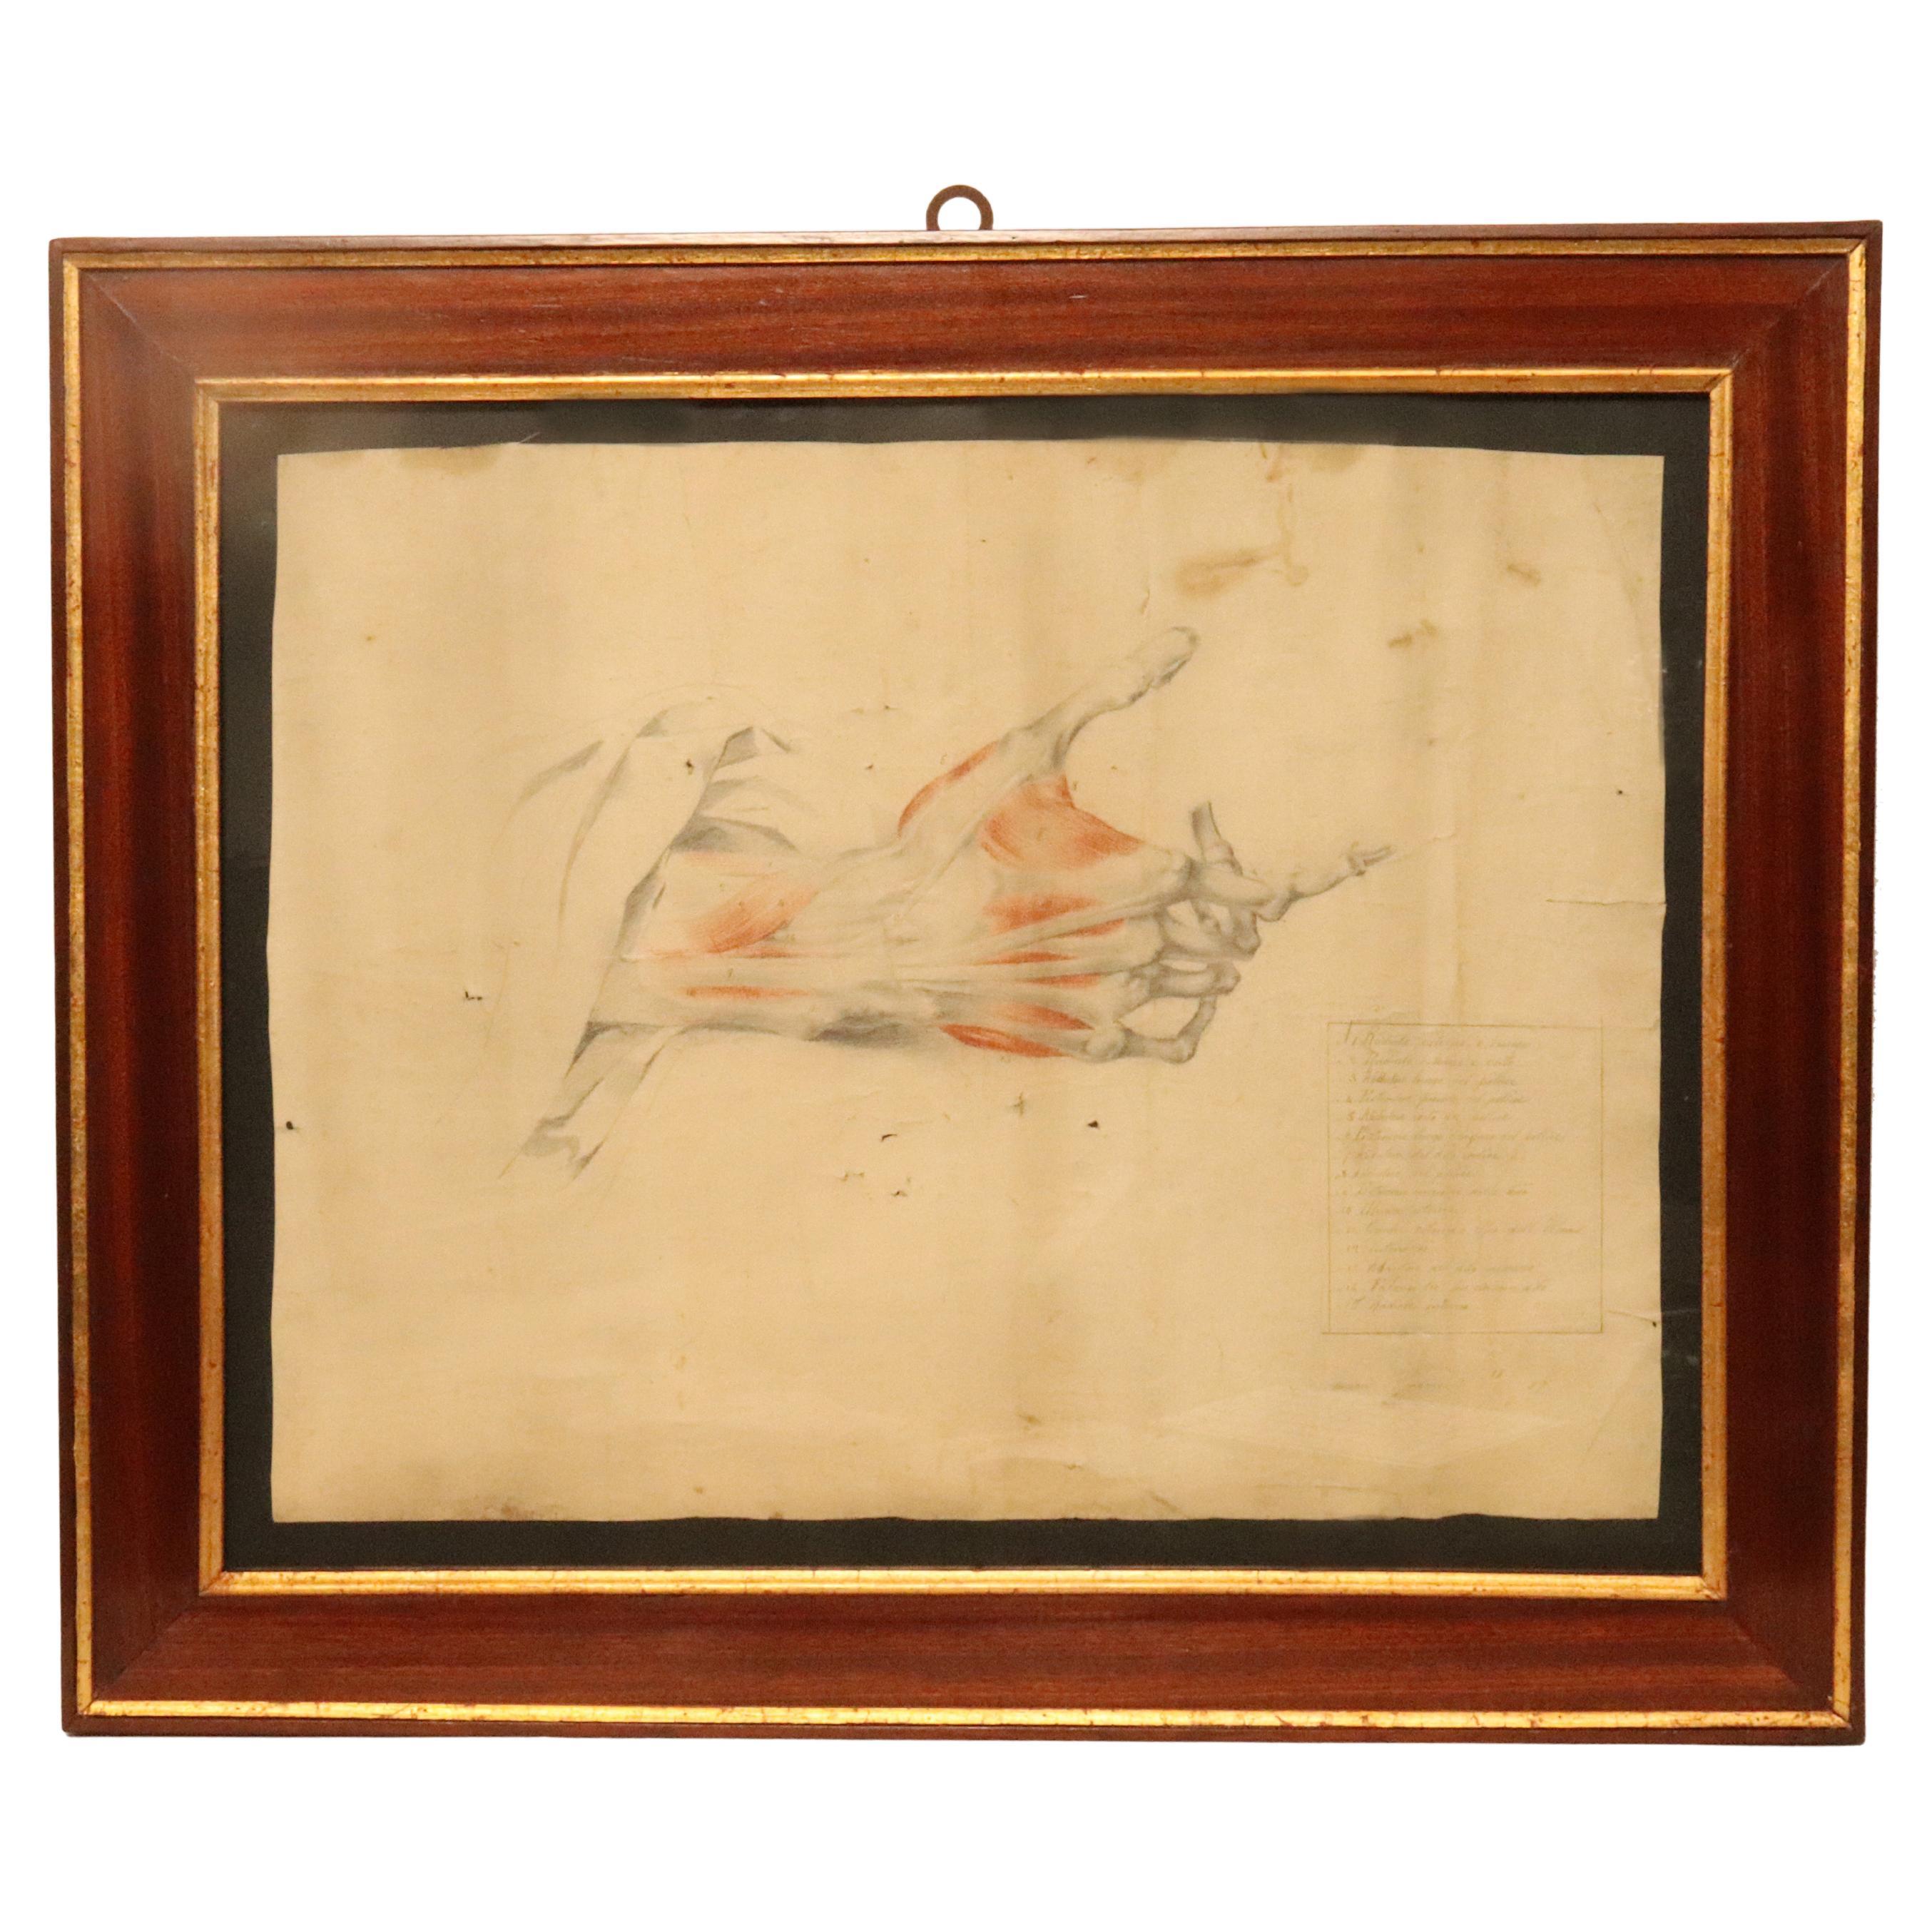 Anatomical drawing of an hand, made in pencil and sanguine, Italy 1879. For Sale